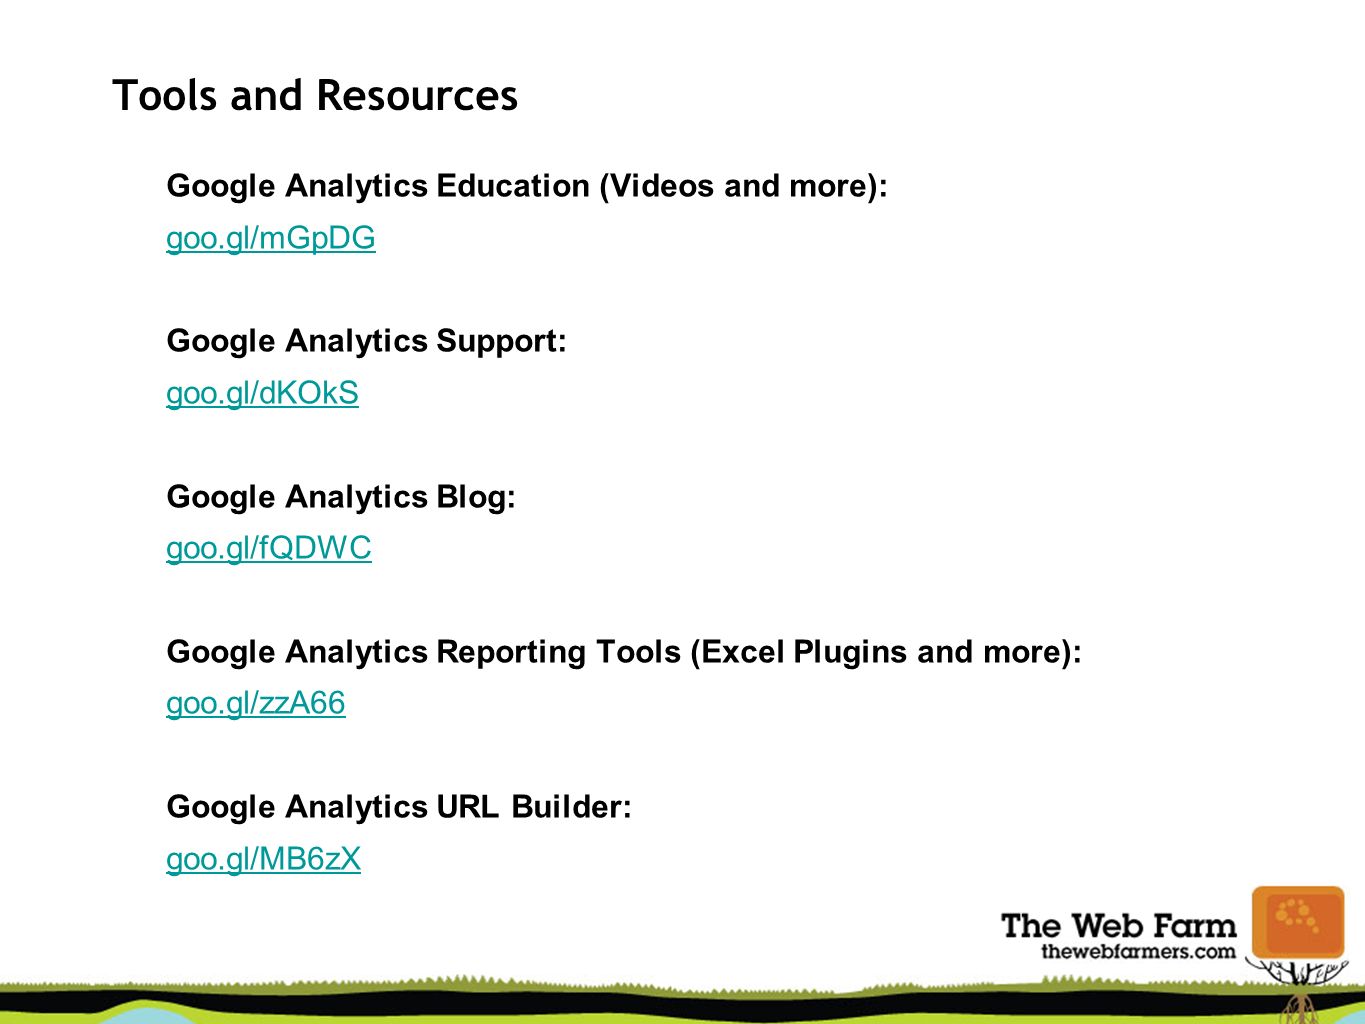 Tools and Resources Google Analytics Education (Videos and more): goo.gl/mGpDG Google Analytics Support: goo.gl/dKOkS Google Analytics Blog: goo.gl/fQDWC Google Analytics Reporting Tools (Excel Plugins and more): goo.gl/zzA66 Google Analytics URL Builder: goo.gl/MB6zX